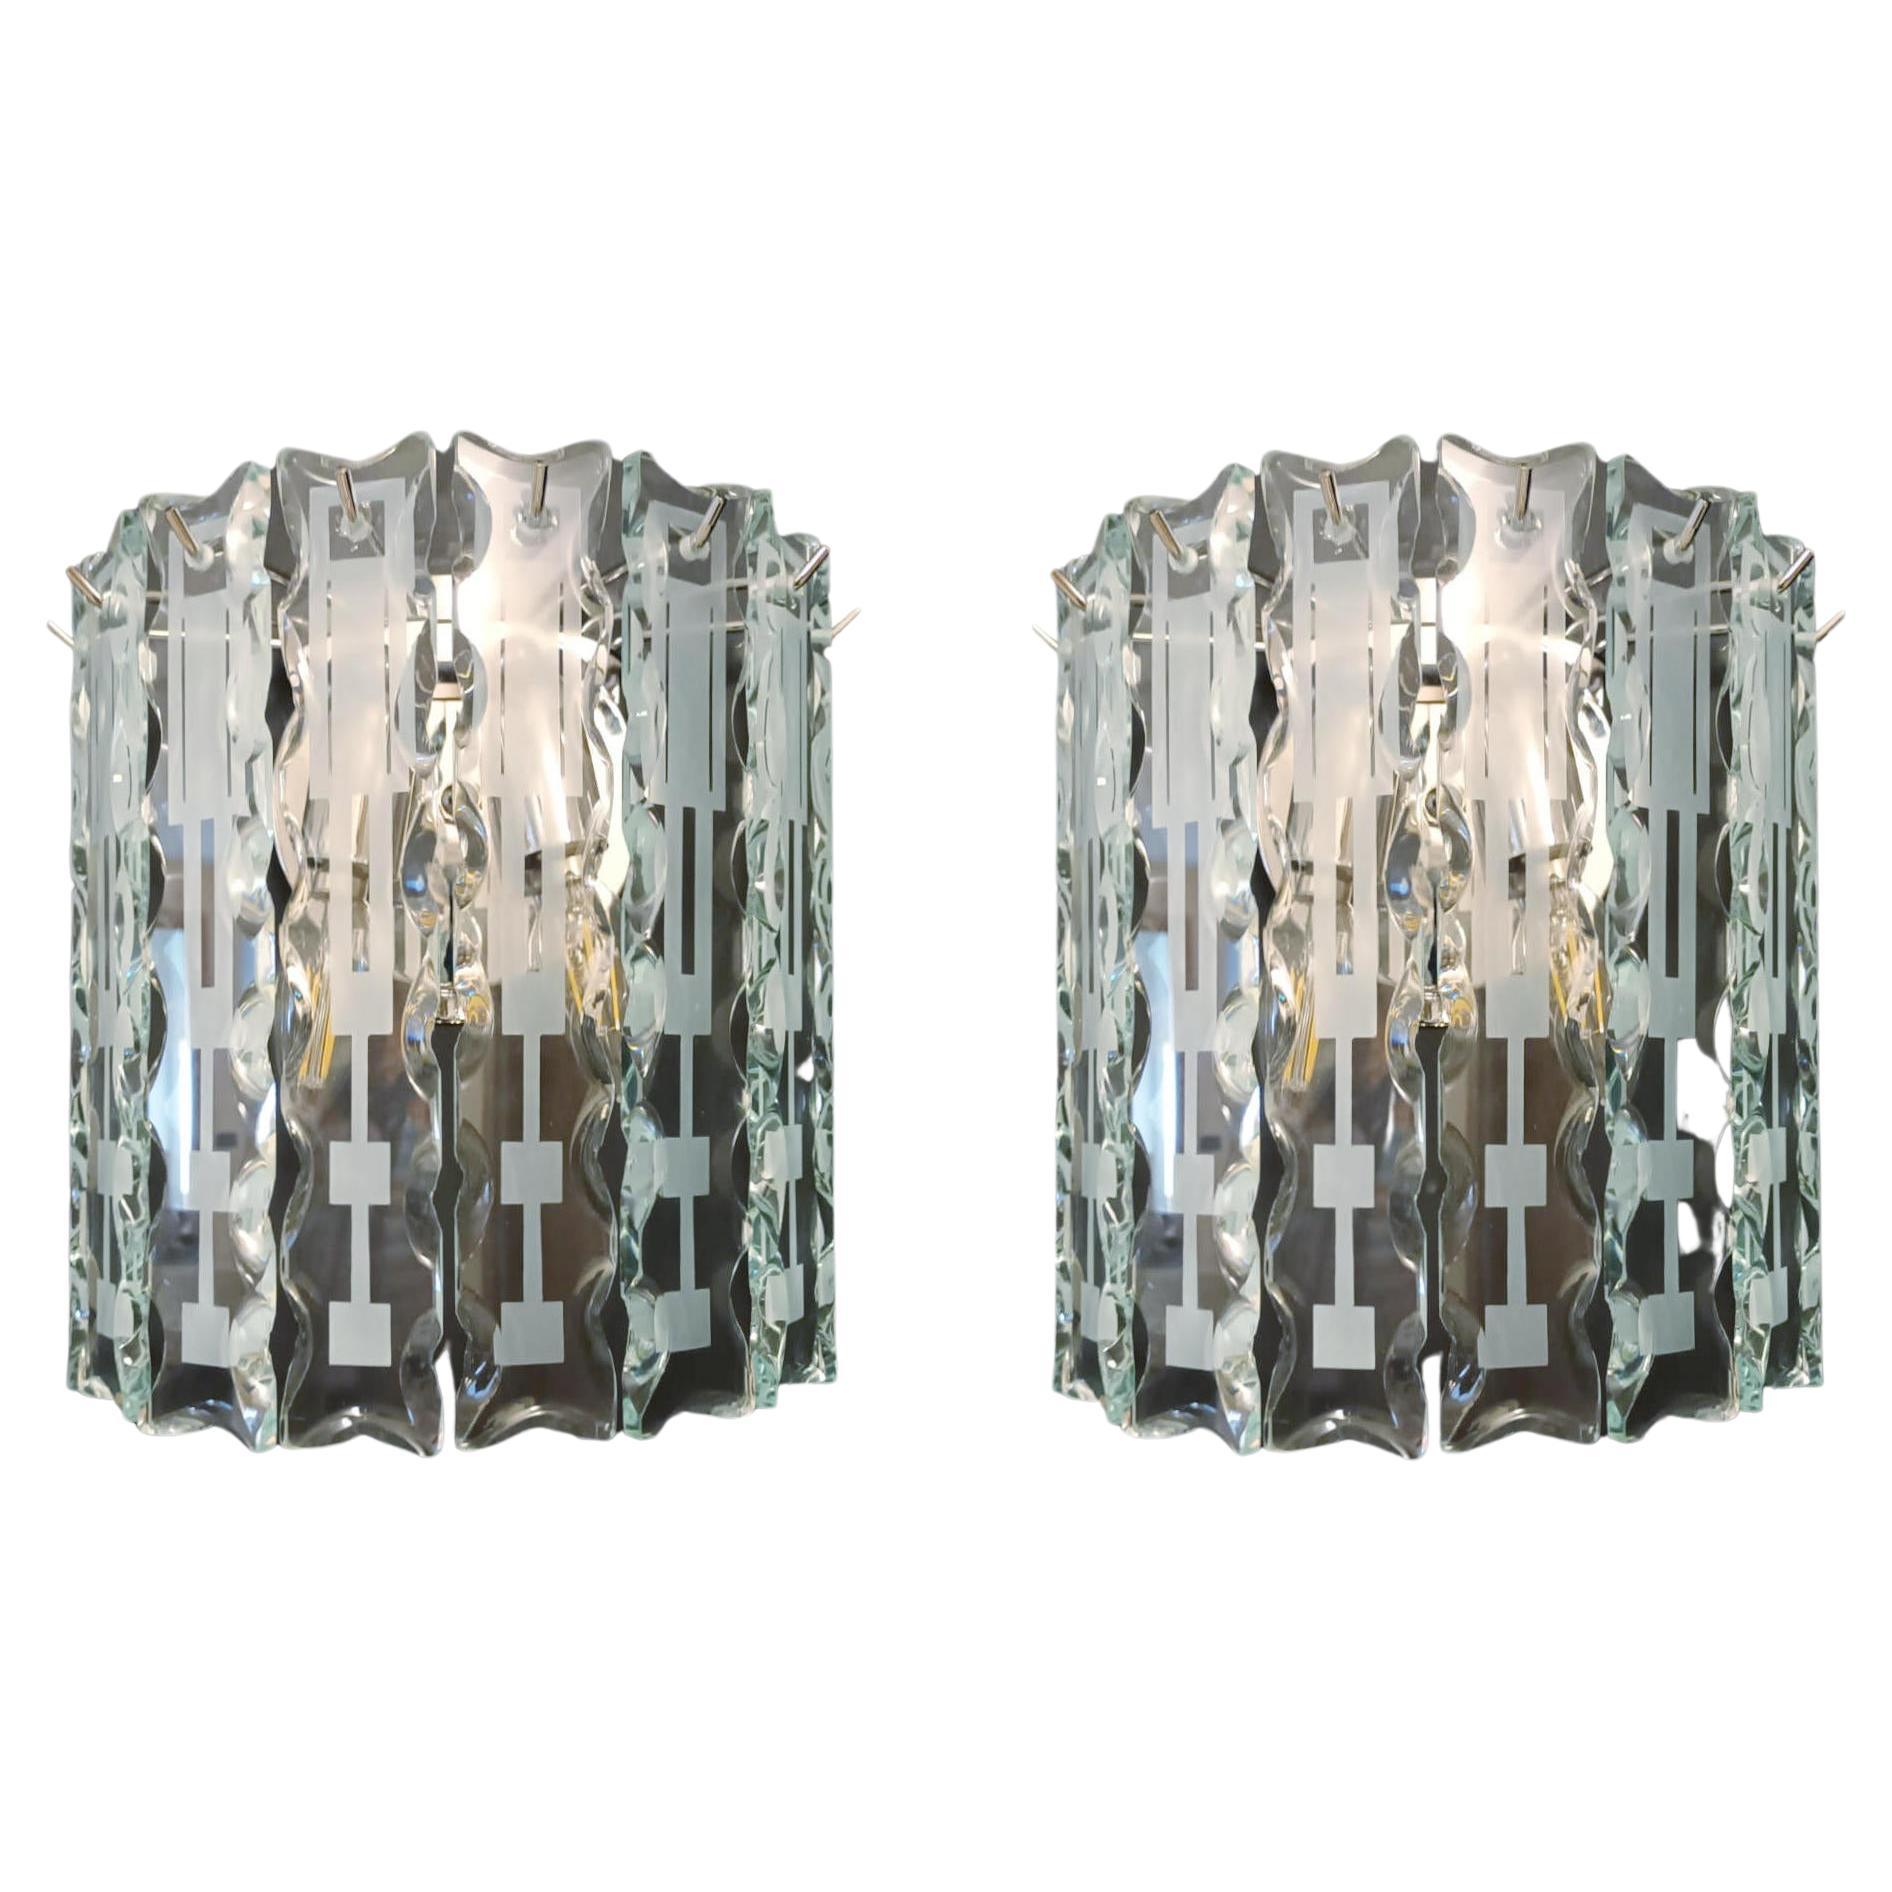 Pair of Beveled Sconces by Cristal Arte - 3 Pairs Available For Sale